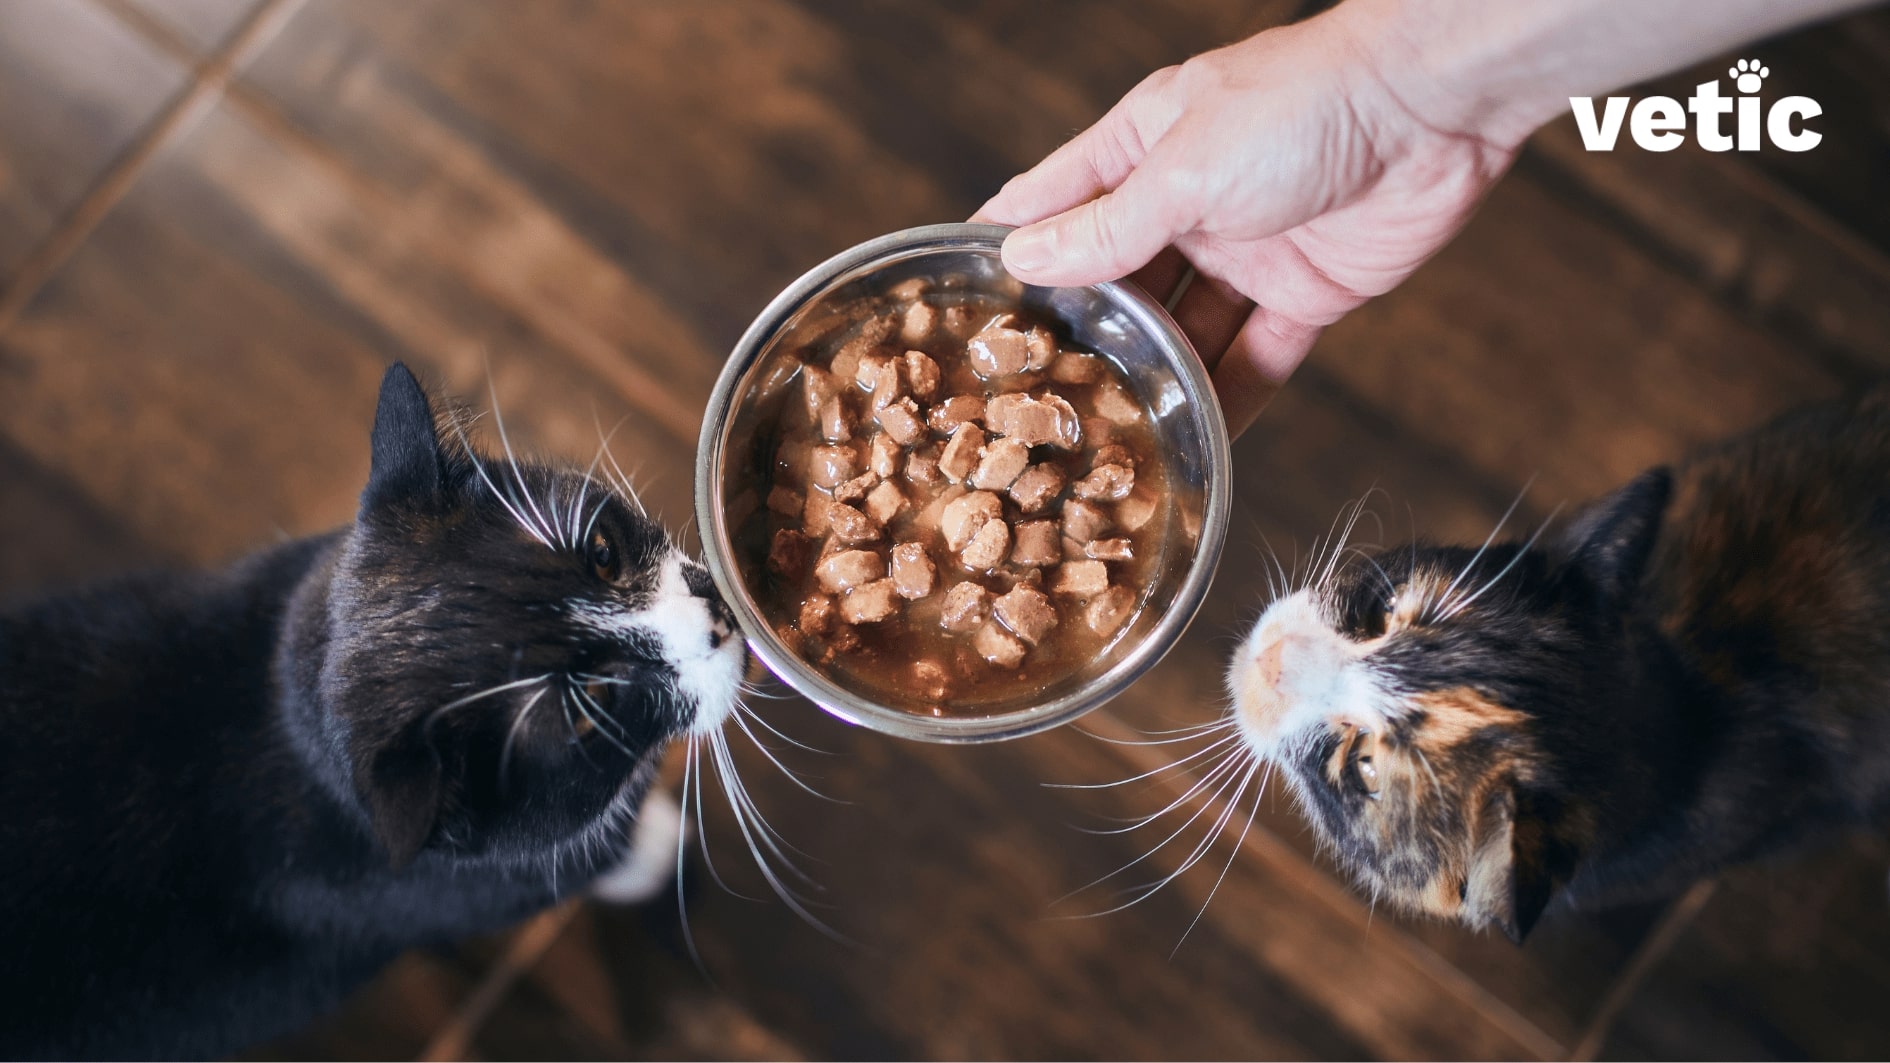 Top shot of hand offering a bowl of wet cat food to two cats. one cat is a calico and the other one is mostly black with white paws and a white muzzle. Commercial cat food can replace a cat's natural diet of animal proteins since it is not feasible for cats to be vegetarians.